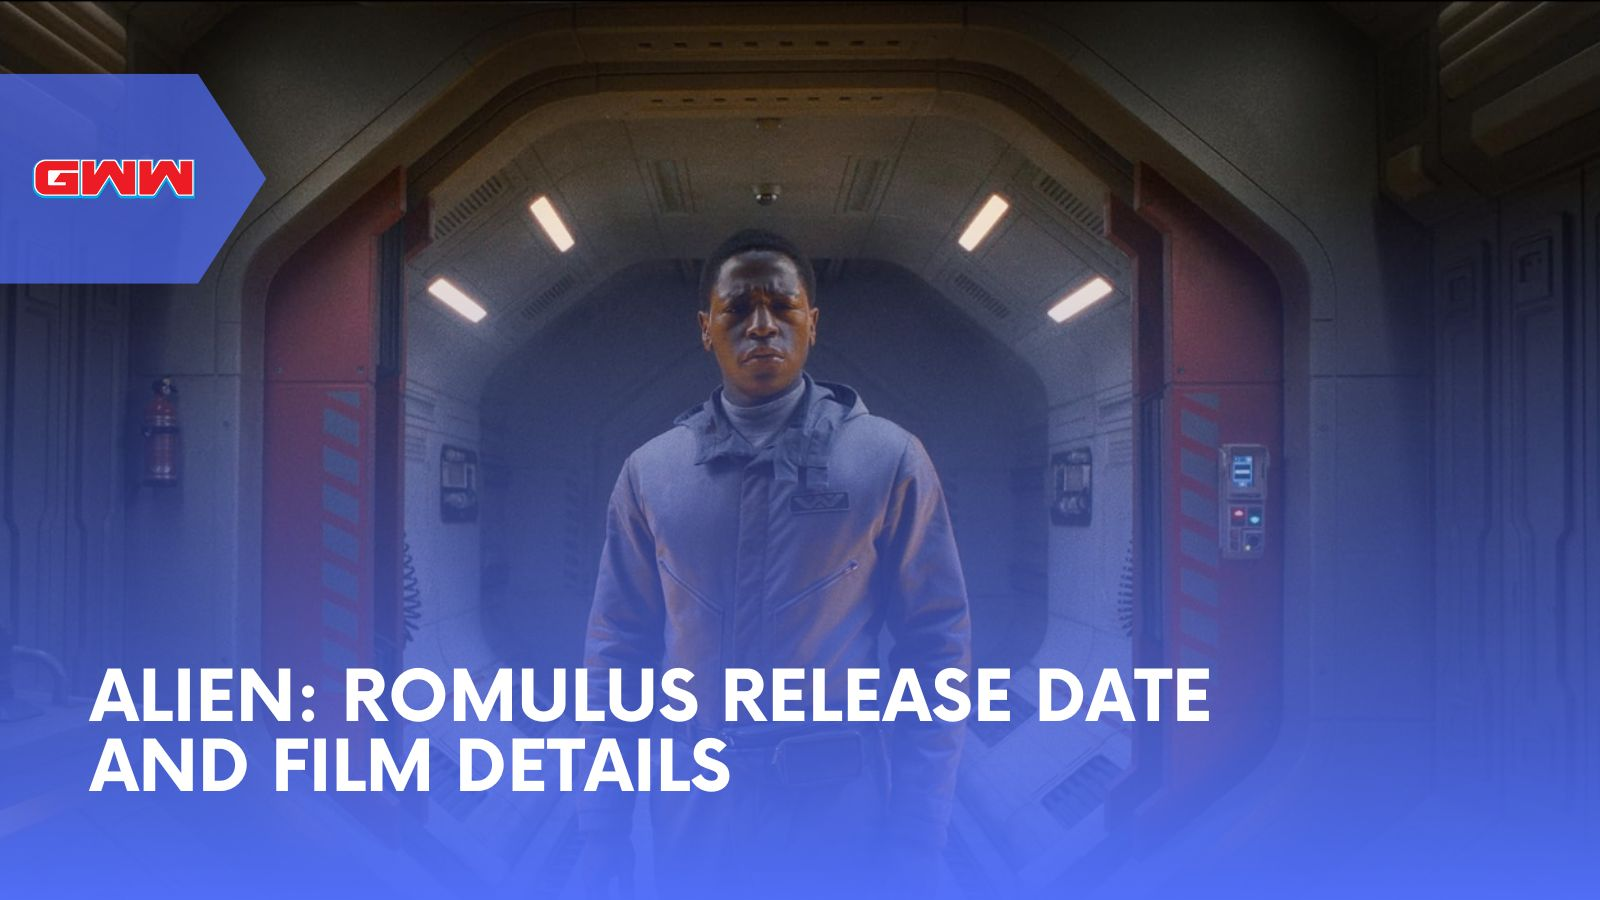 Alien: Romulus Release Date and Film Details